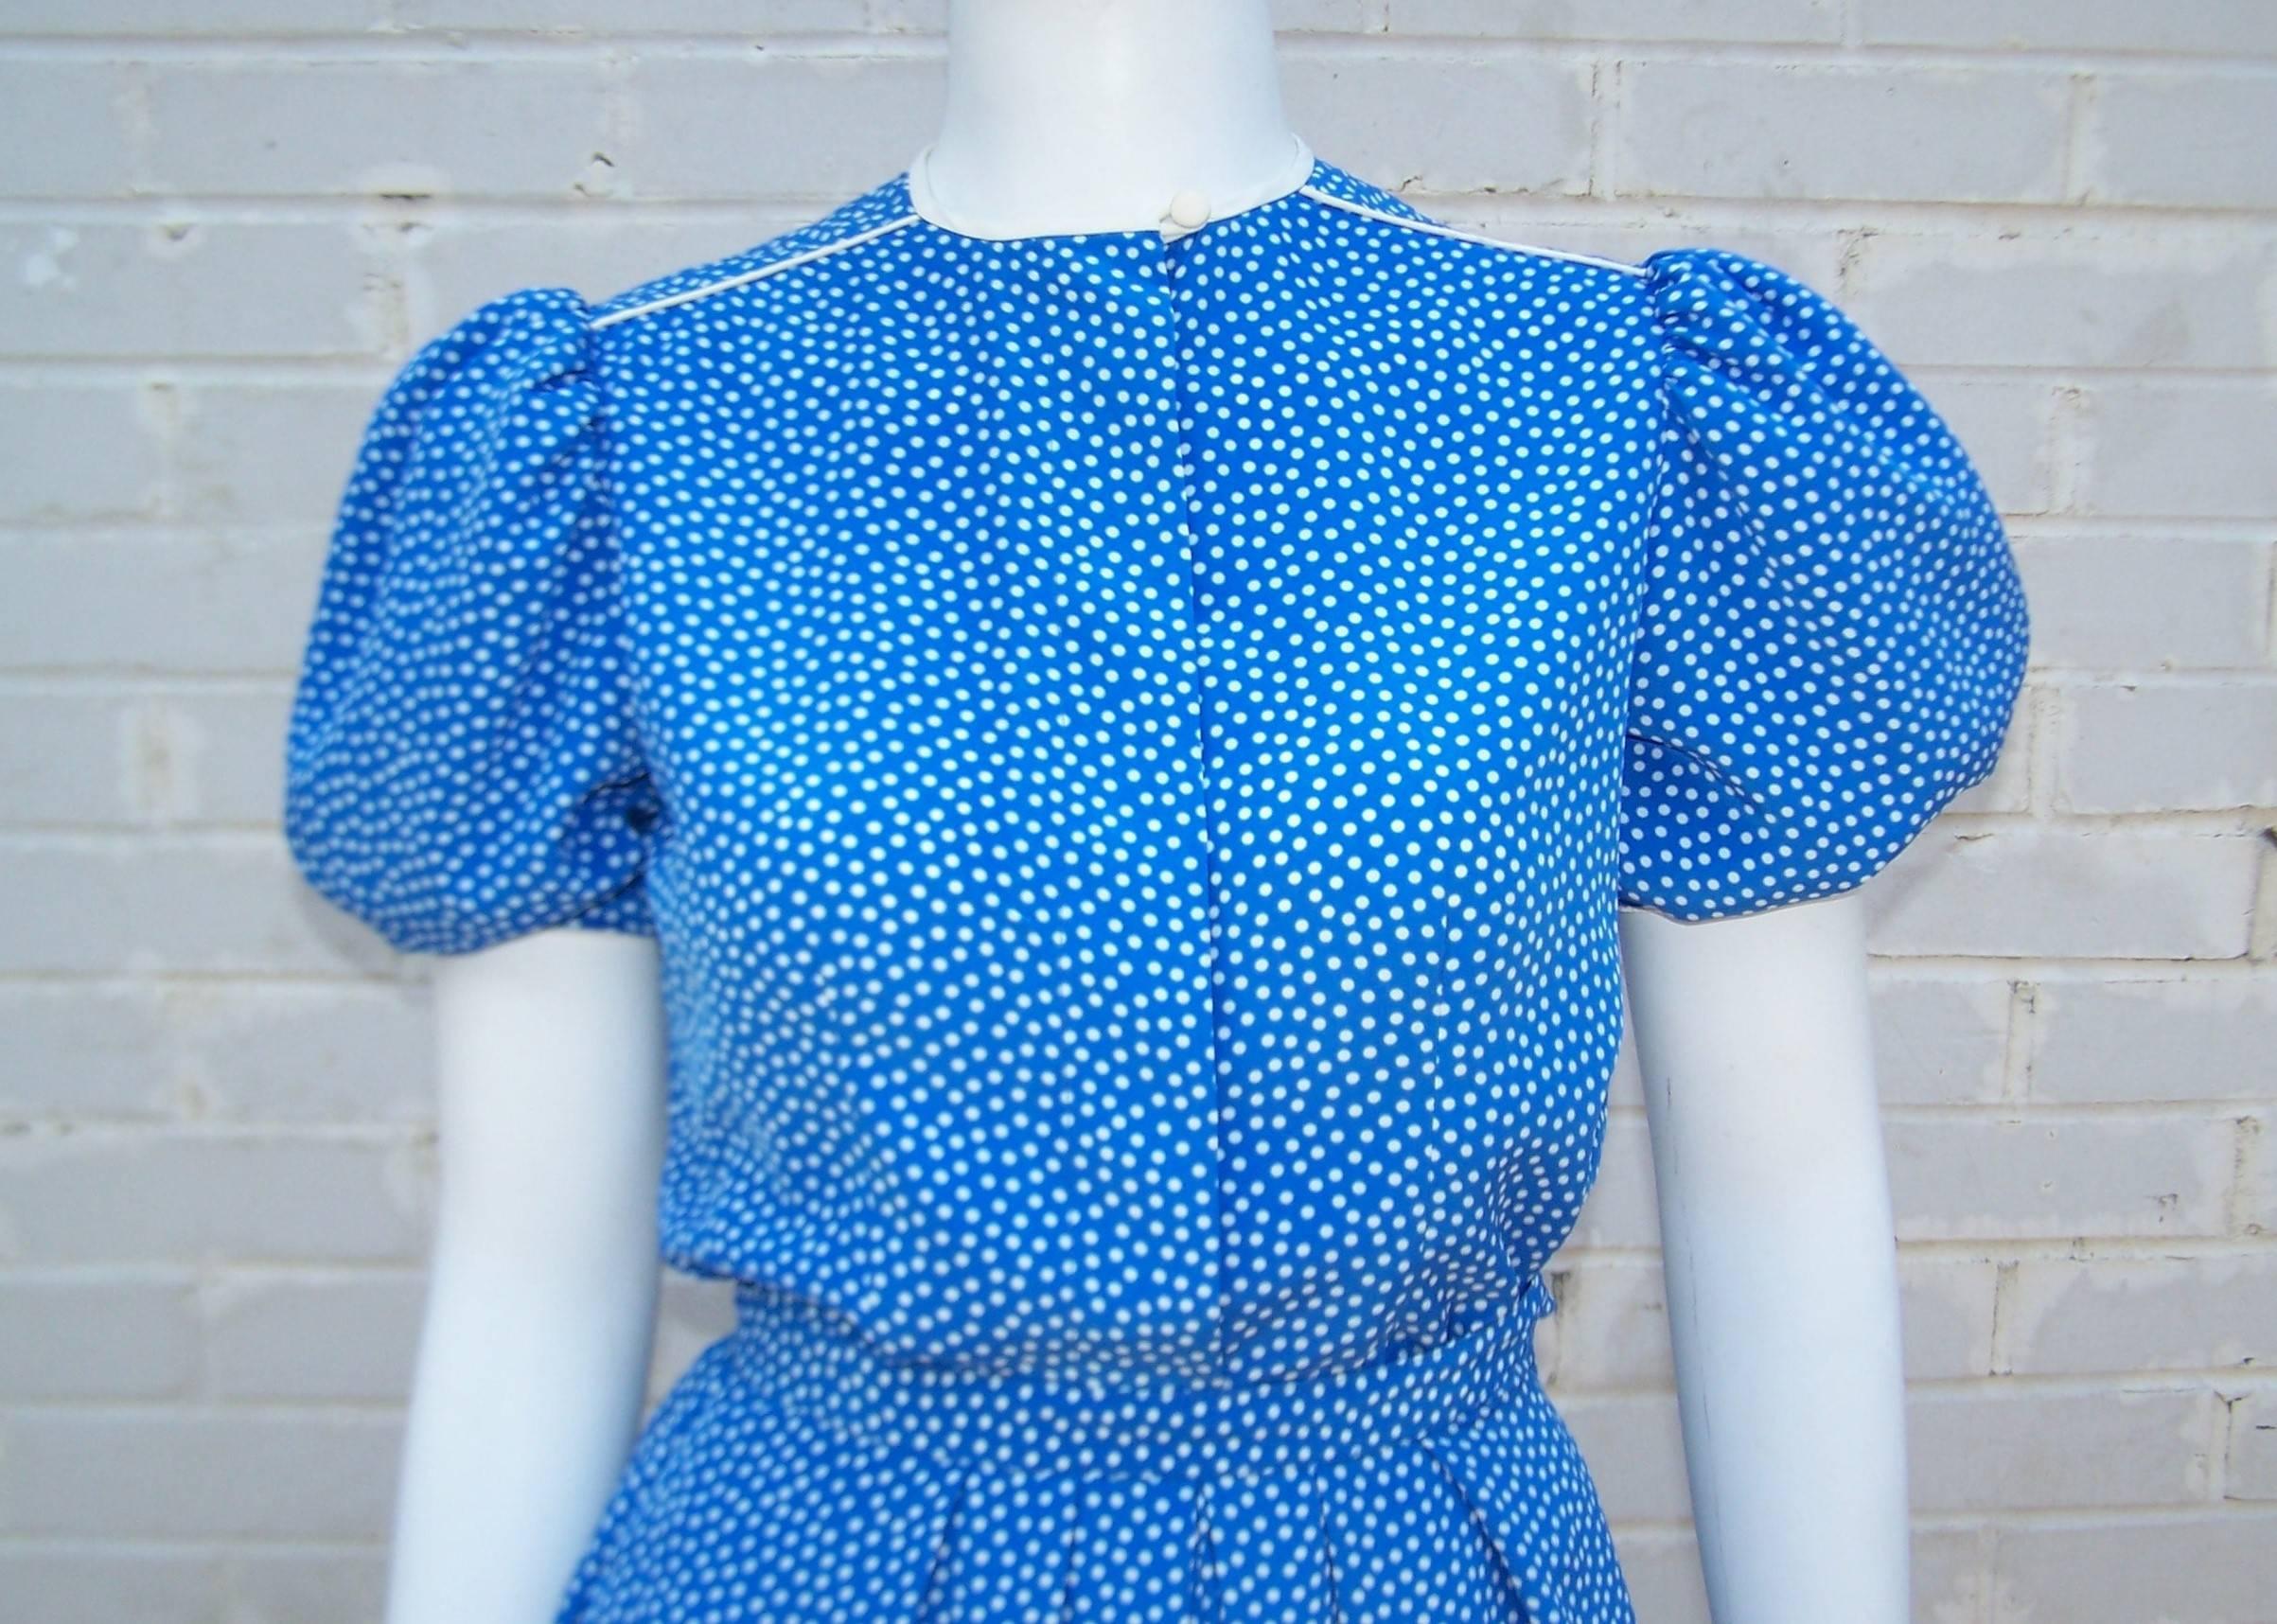 This ladylike electric blue and white polka dot silk ensemble by Albert & Pearl Nipon is loaded with lovely details typical of the Albert Nipon label.  The top has hidden buttons at the front with white cording at the neckline, shoulder and puffed